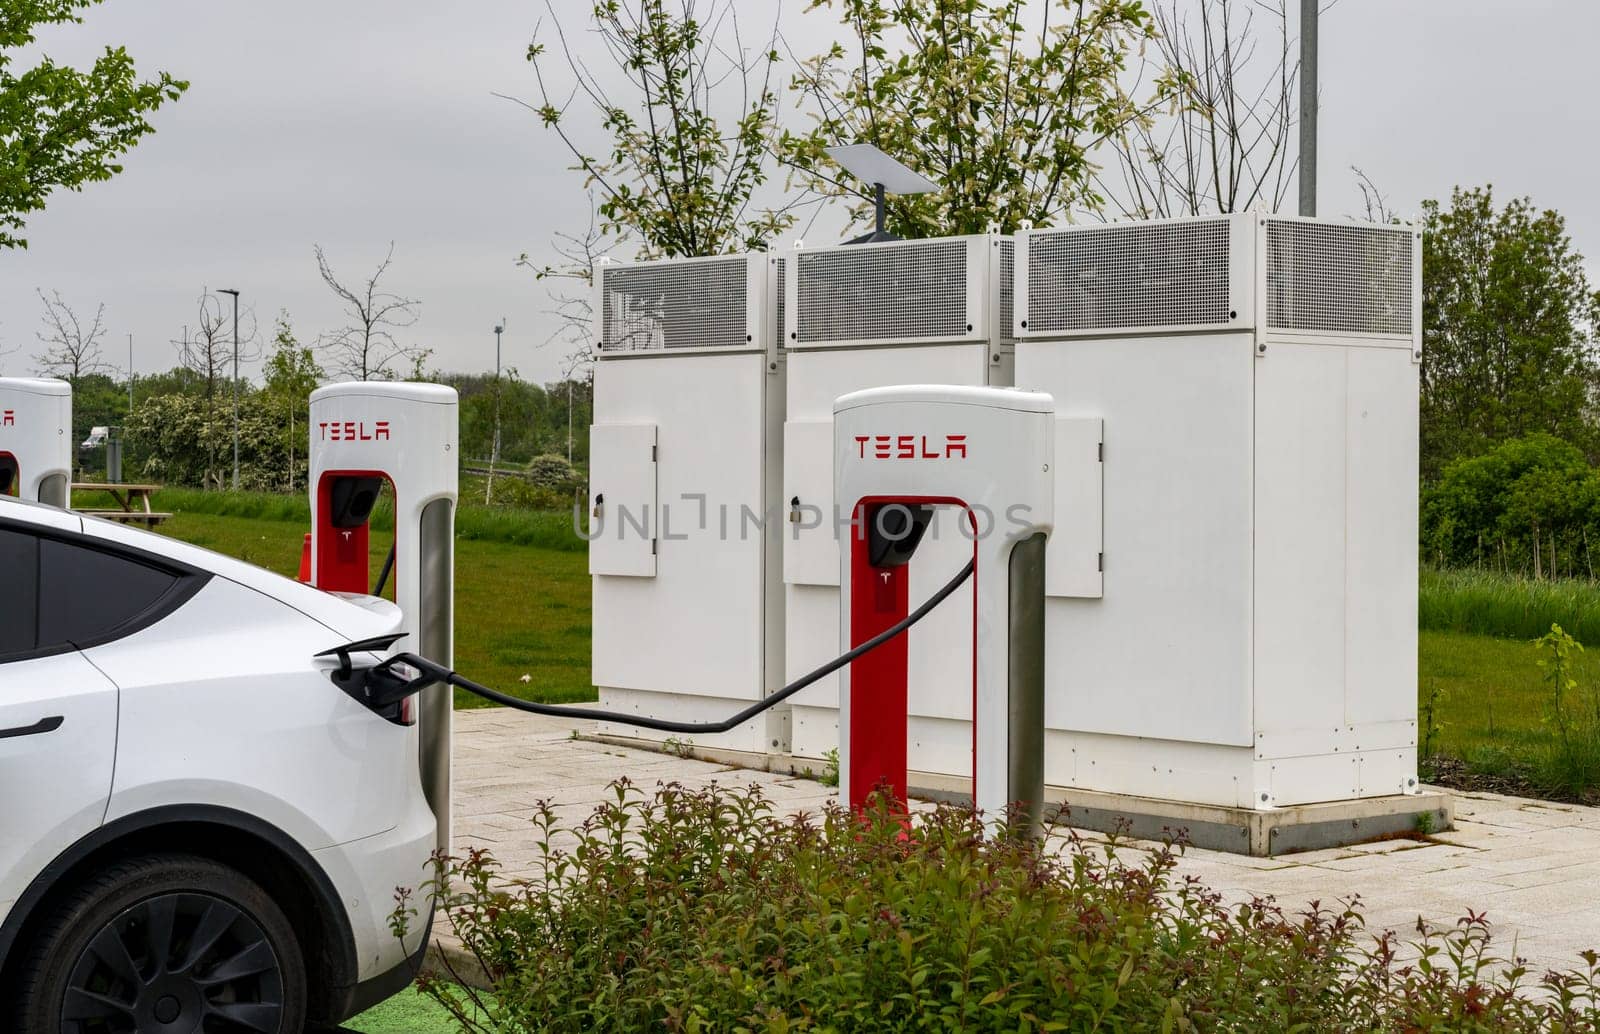 Tesla electric vehicle charging station on motorway in UK by steheap